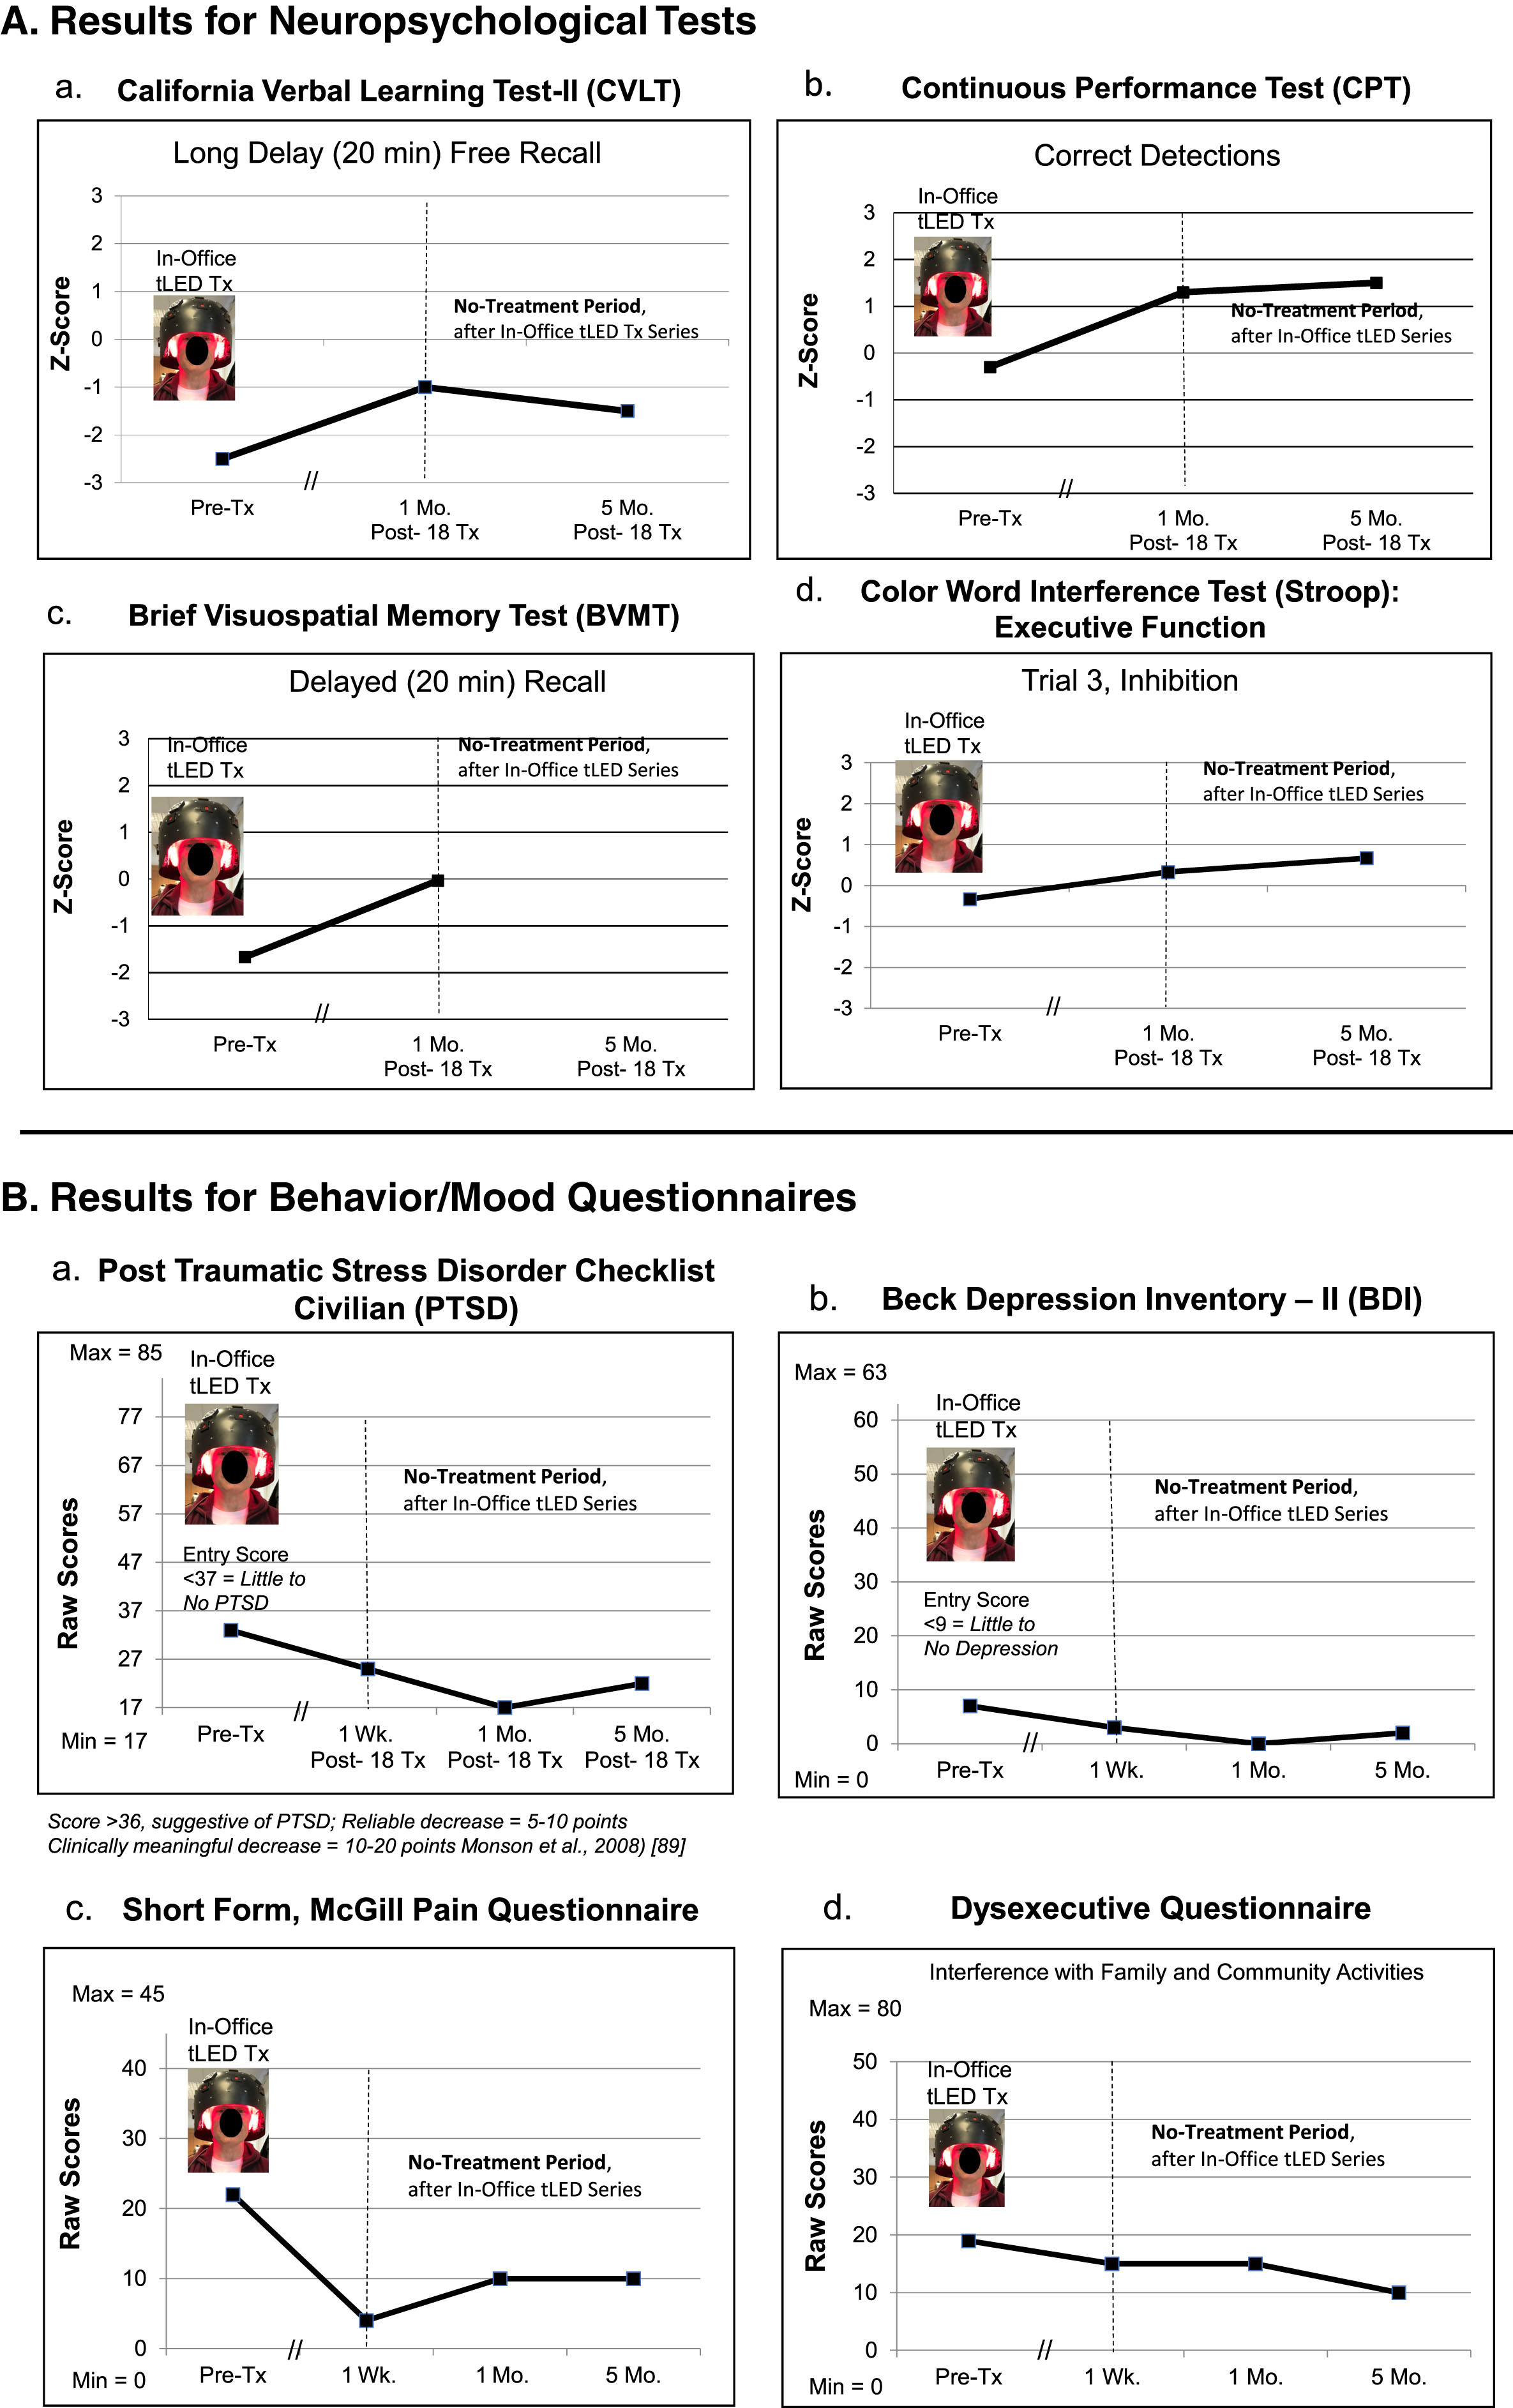 P4, cognitive and behavior/mood results. A) Z-Score graphs for some NP tests (CVLT, CPT, BVMT, Stroop) after the initial, in-office tPBM series (Protocol C). B) Behavior/mood ratings after the In-office series. See Supplementary Tables 6A and 6B. NP, neuropsychological; CVLT, California Verbal Learning Test; CPT, Continuous Performance Test; BVMT, Brief Visuospatial Memory Test.